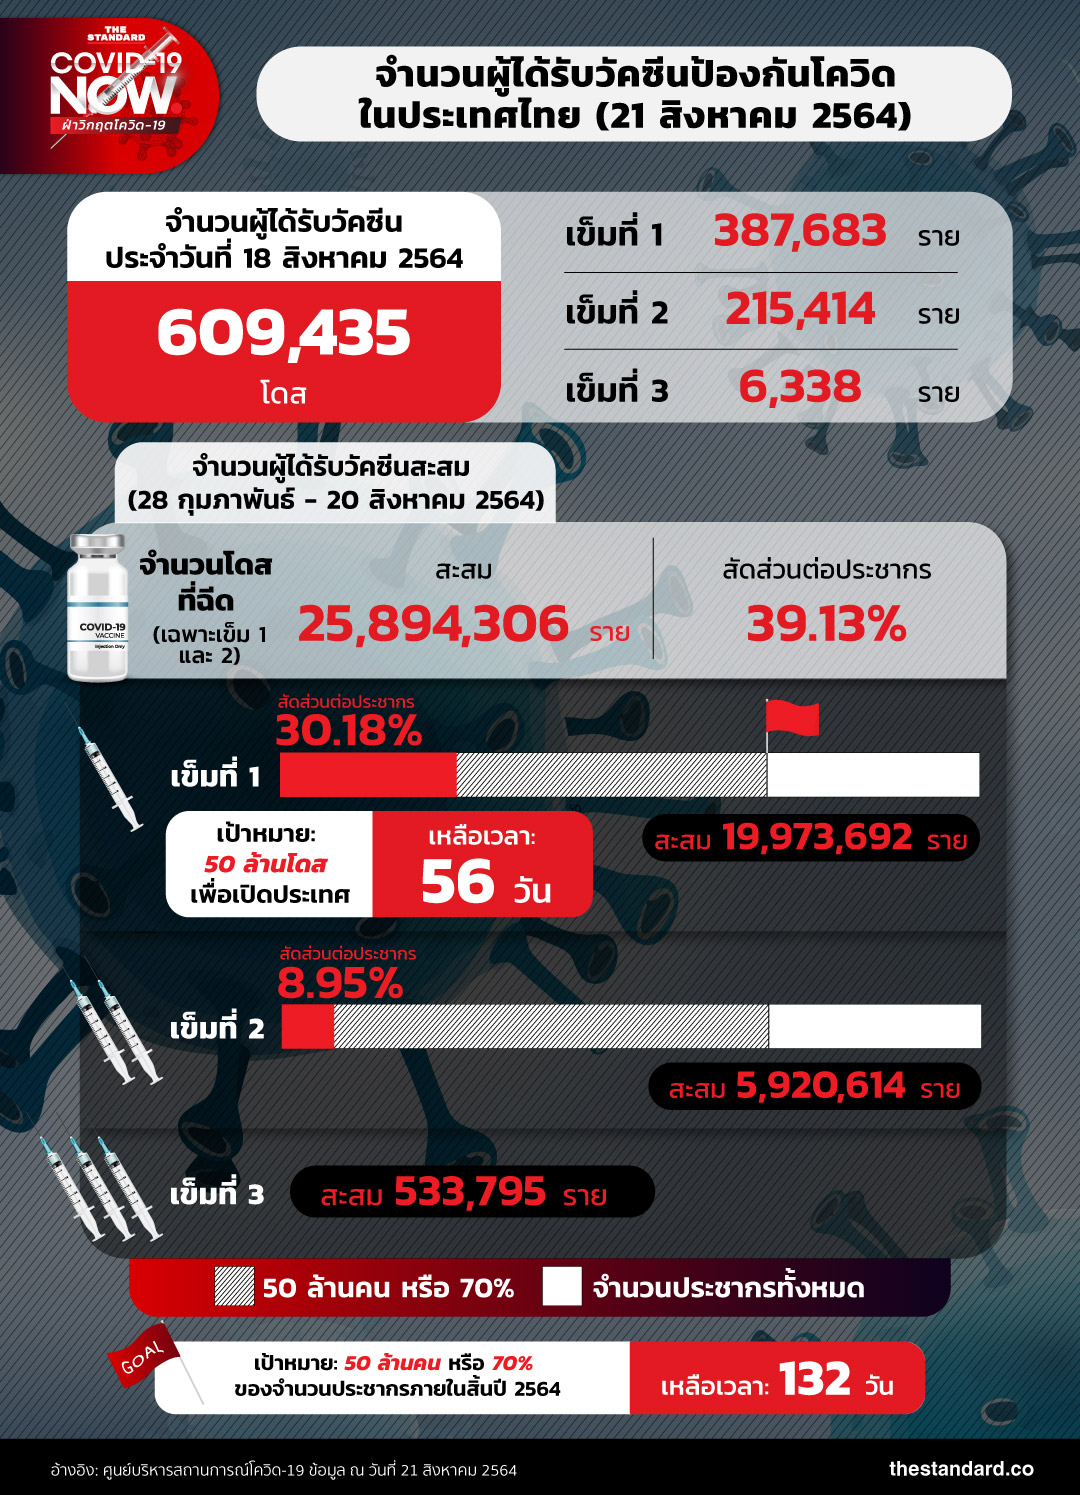 number-of-people-got-covid-19-vaccines-in-thailand-210864